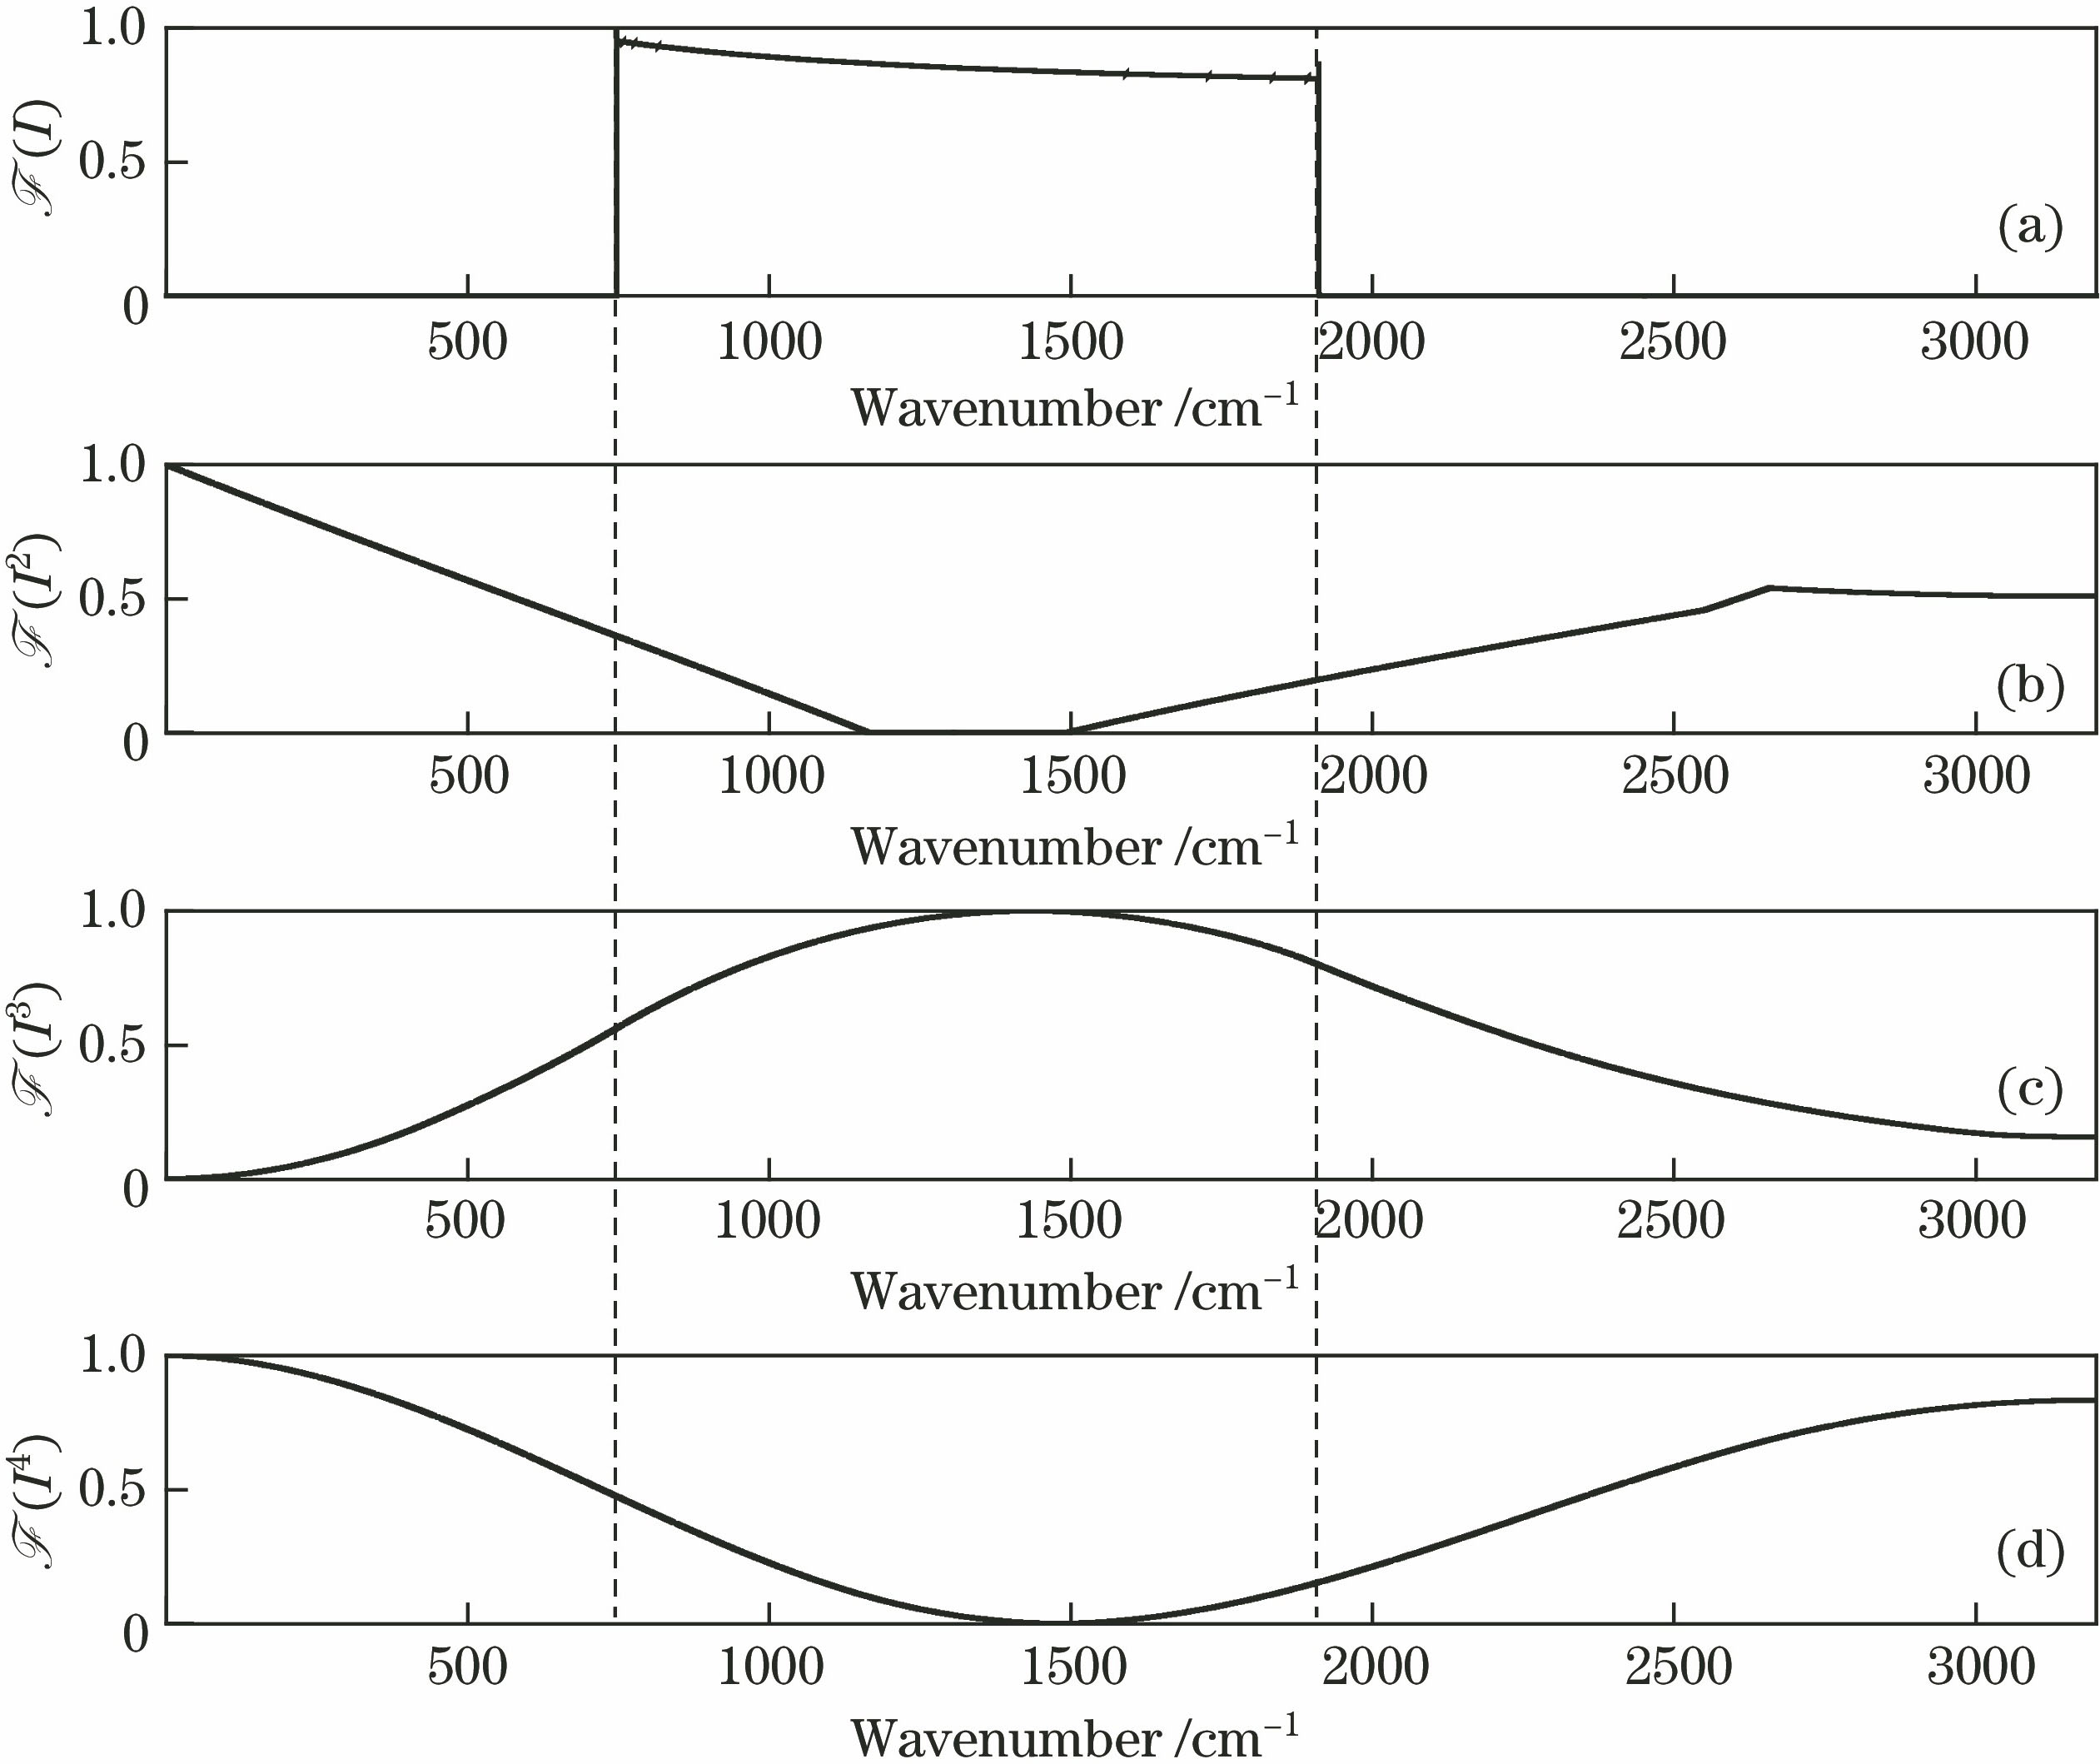 Spectra recovered from interferograms with different orders. (a) The first order response; (b) the second order response; (c) the third order response; (d) the fourth order response